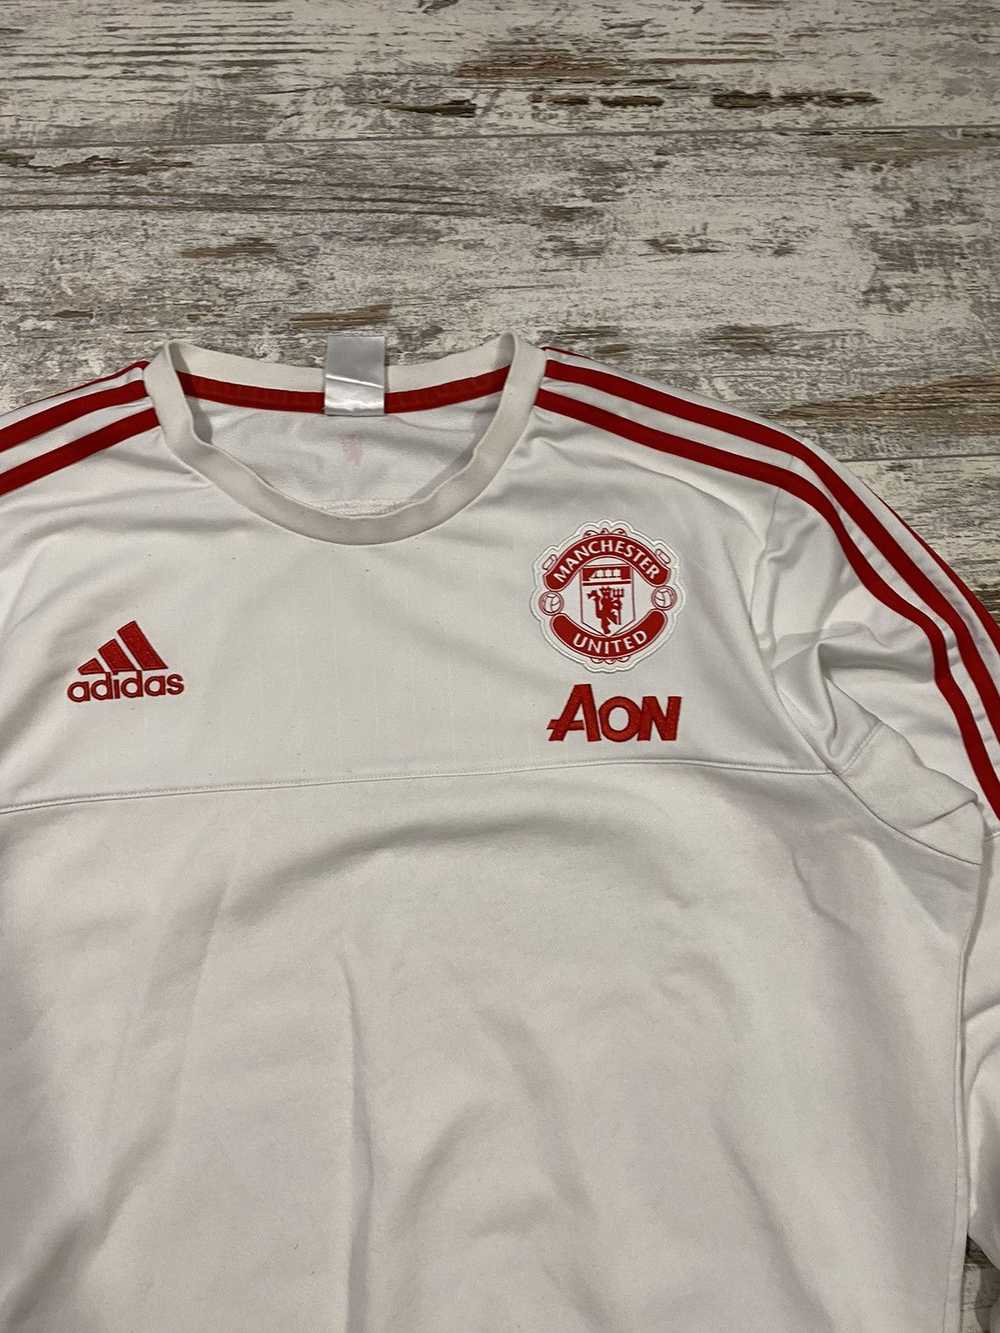 Adidas × Manchester United × Soccer Jersey VINTAG… - image 7